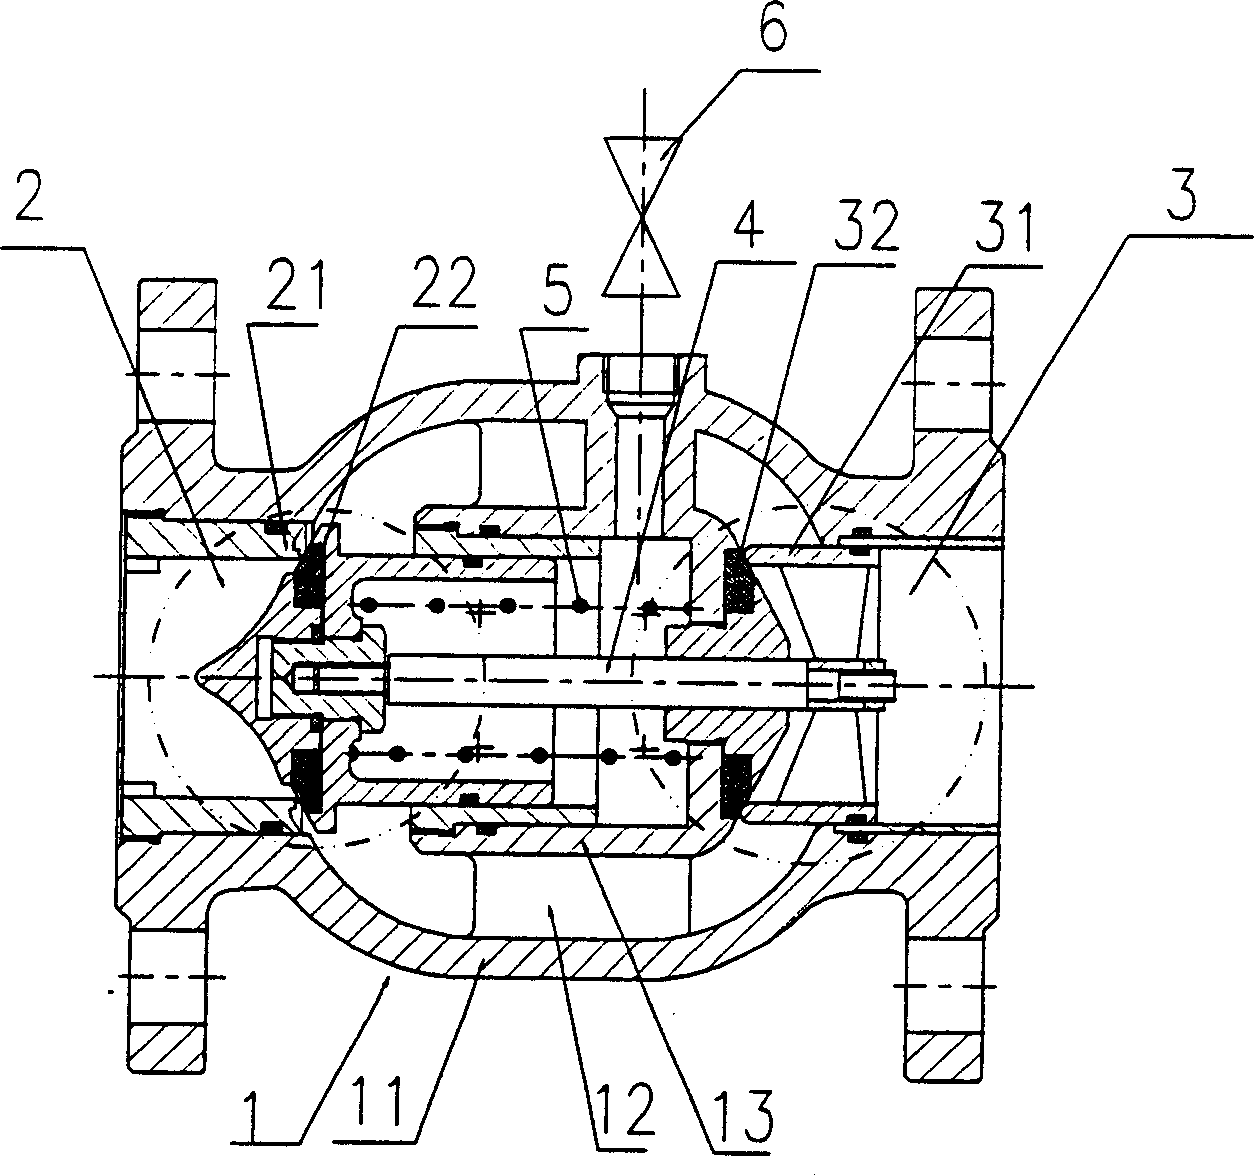 Valve of sealing arrangement in two stages